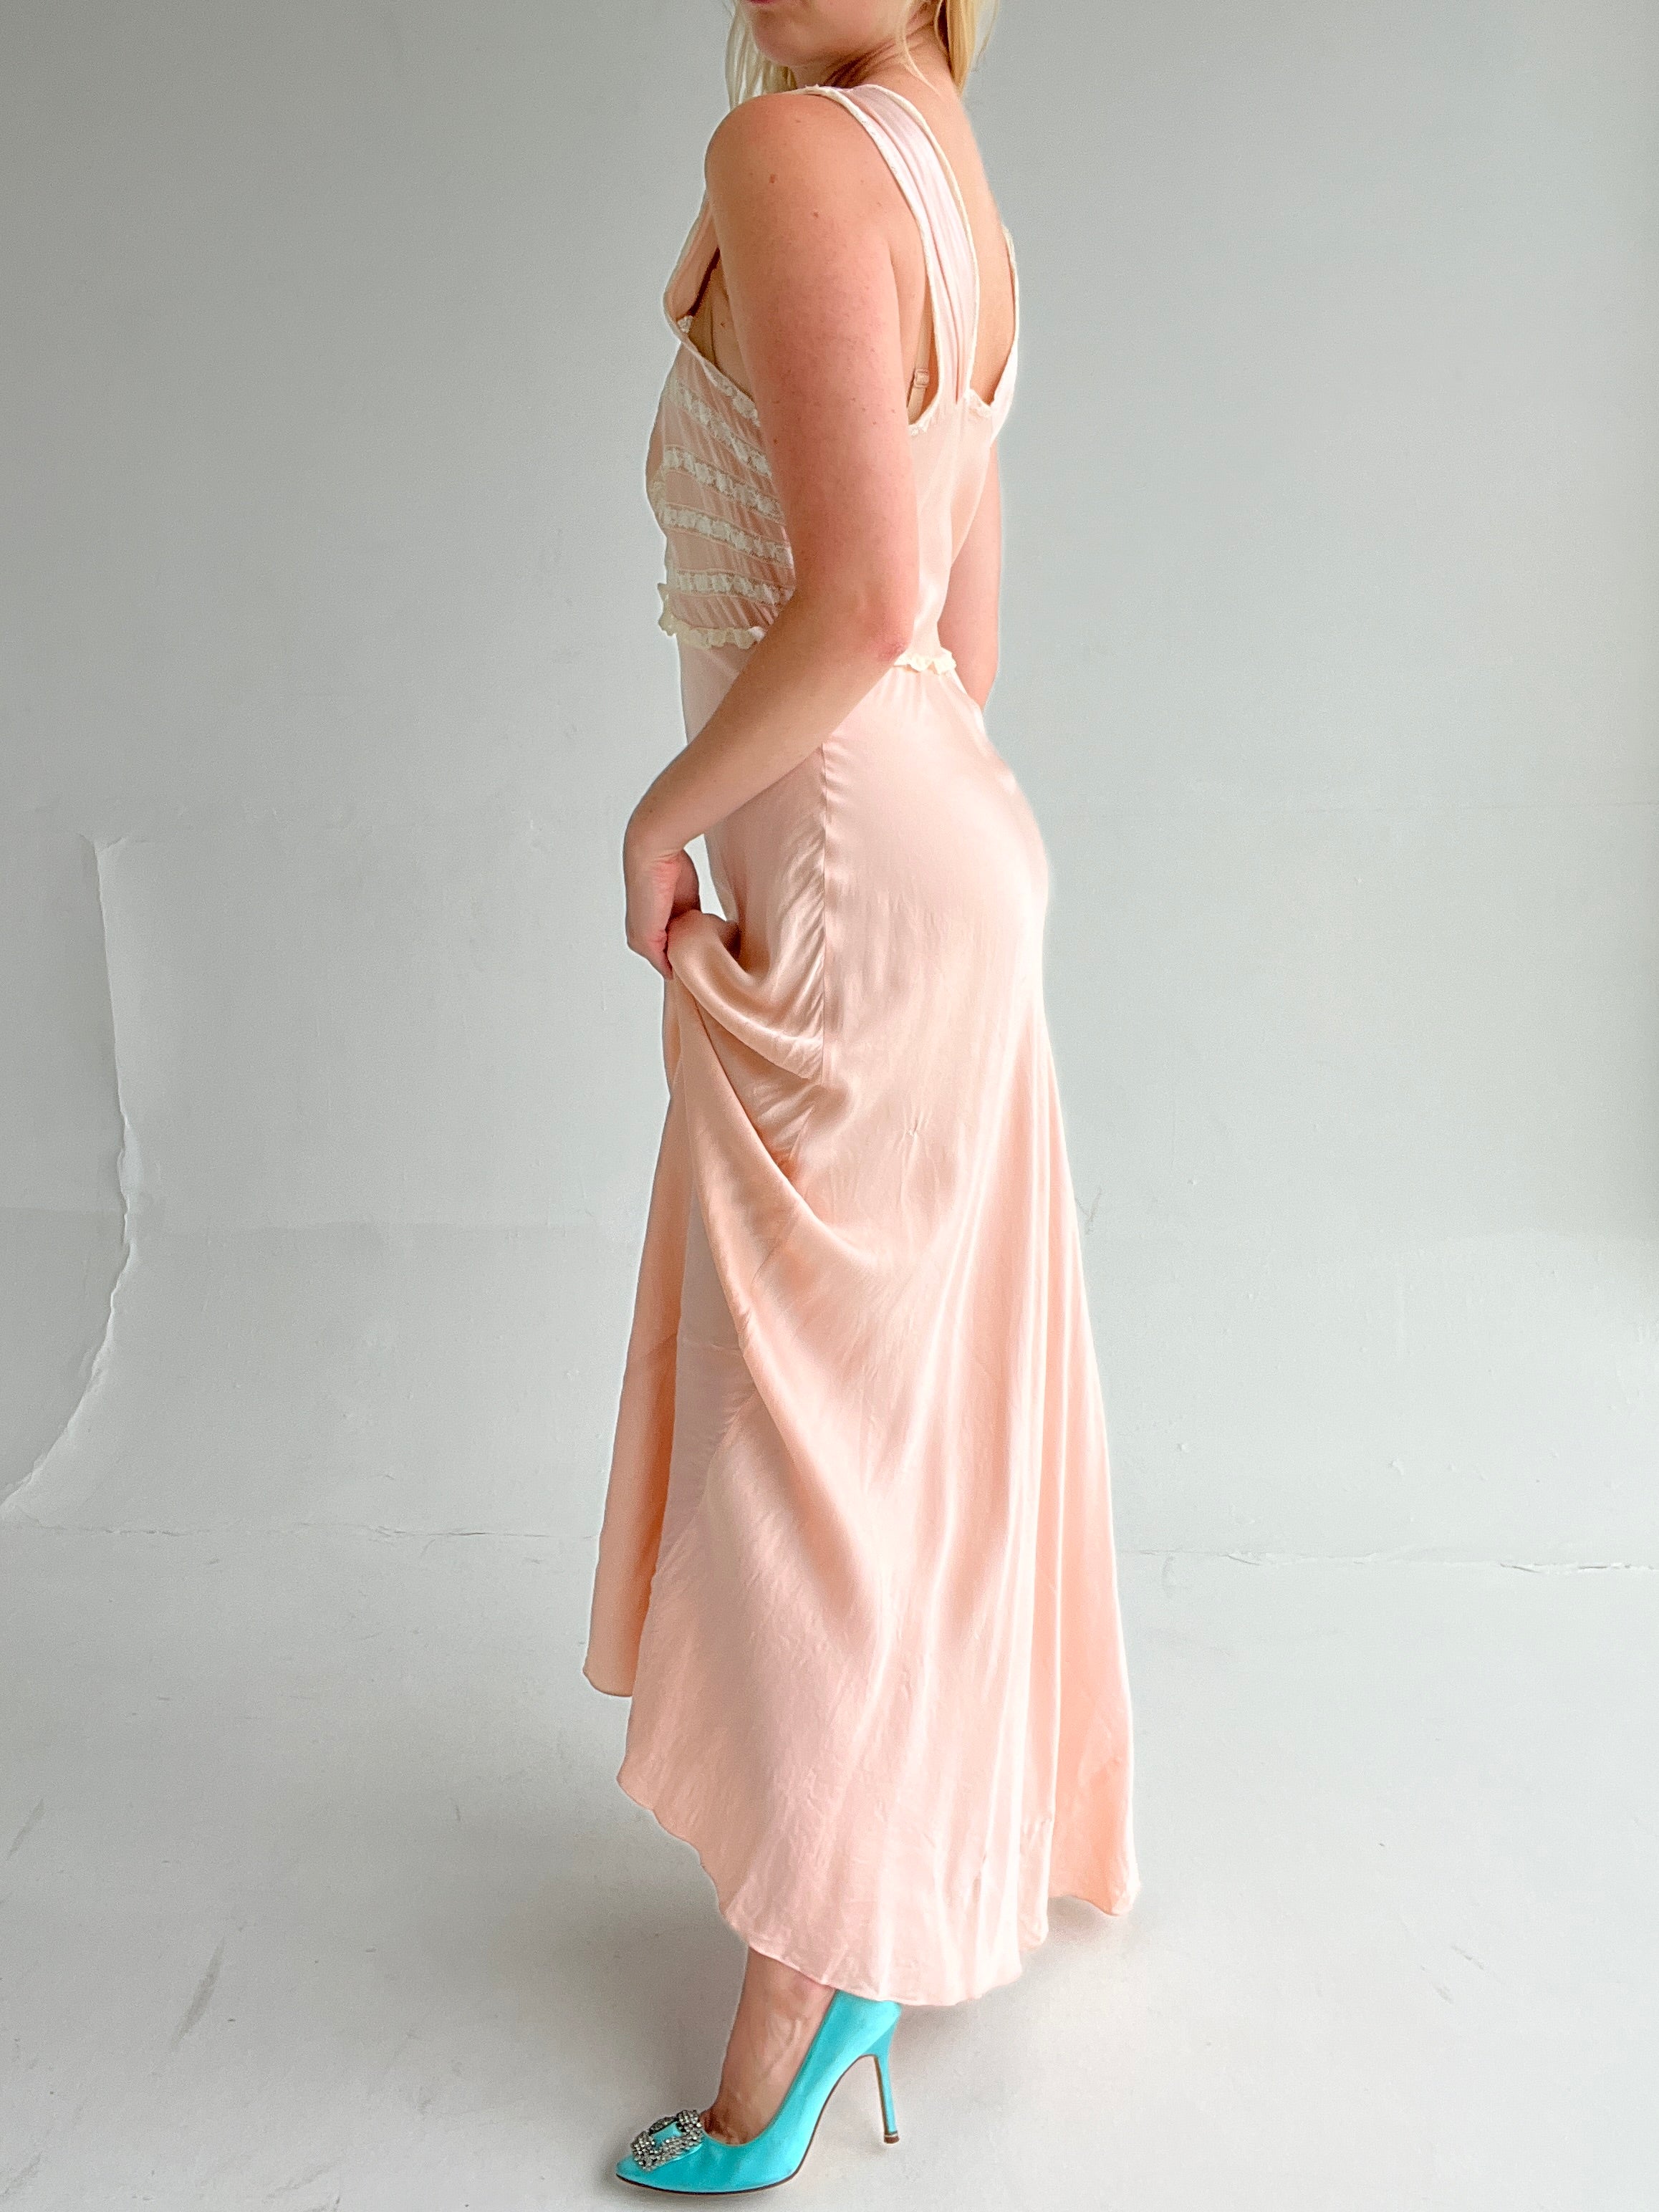 1930's Pink Silk Slip Dress with White Lace